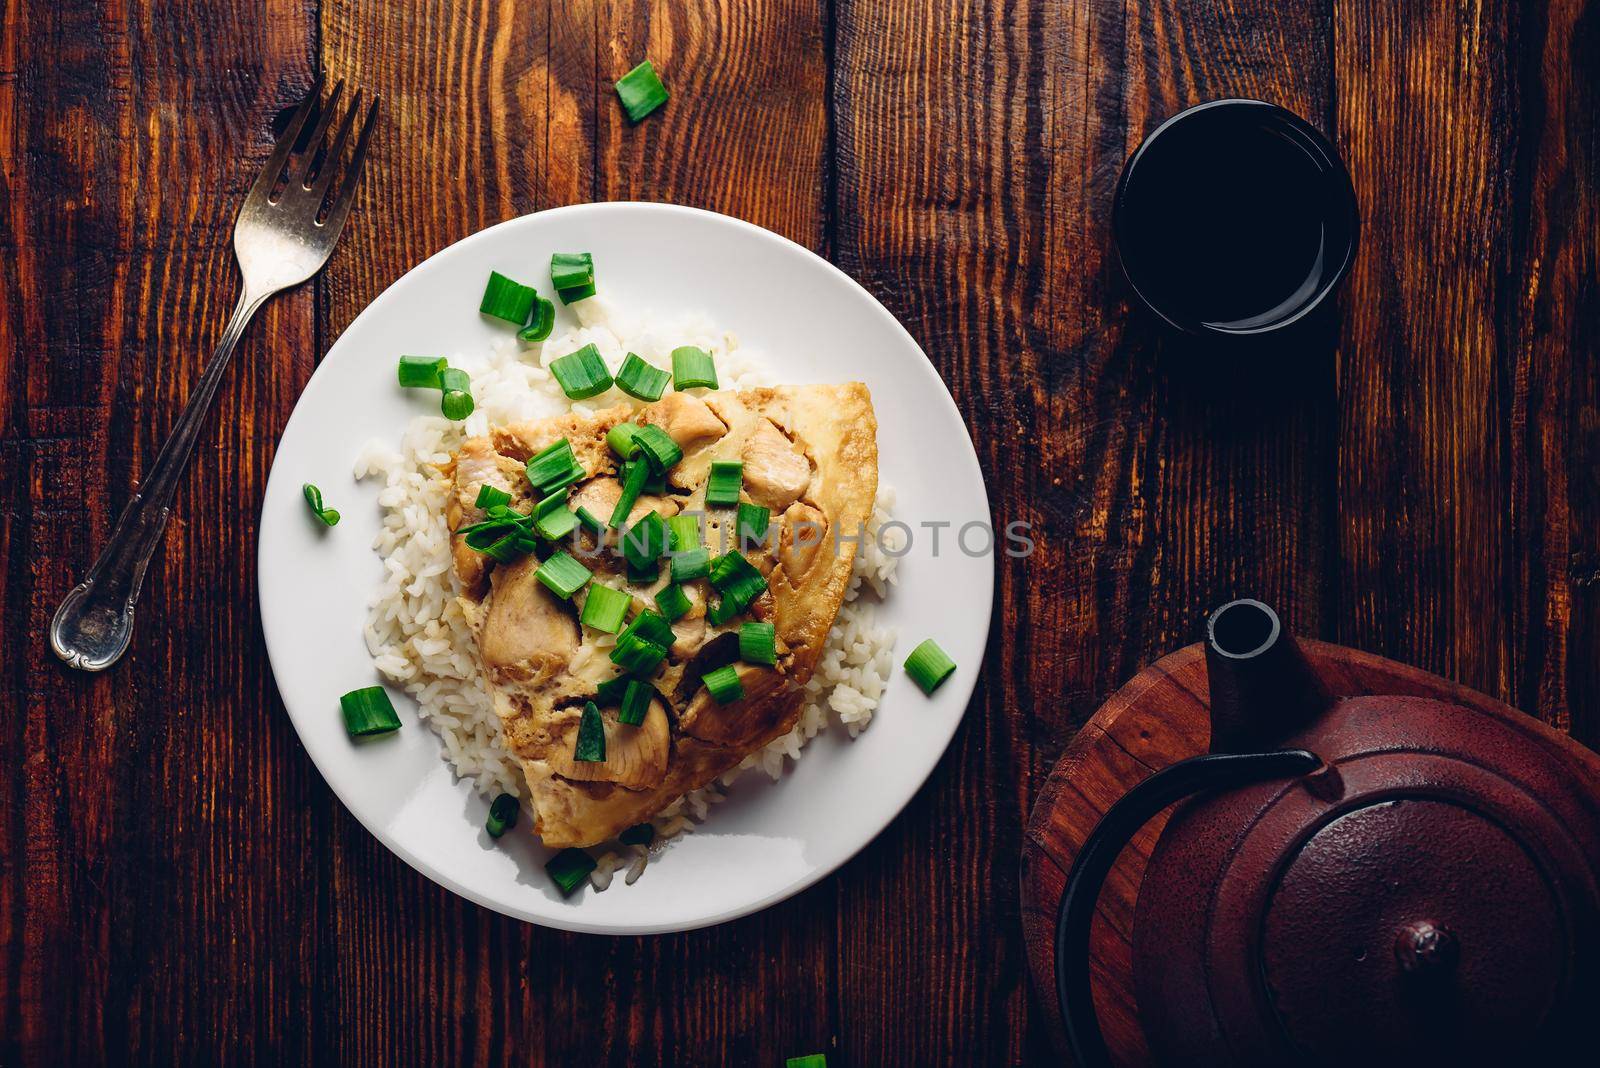 Rice with scrambled eggs, chicken and green onion by Seva_blsv